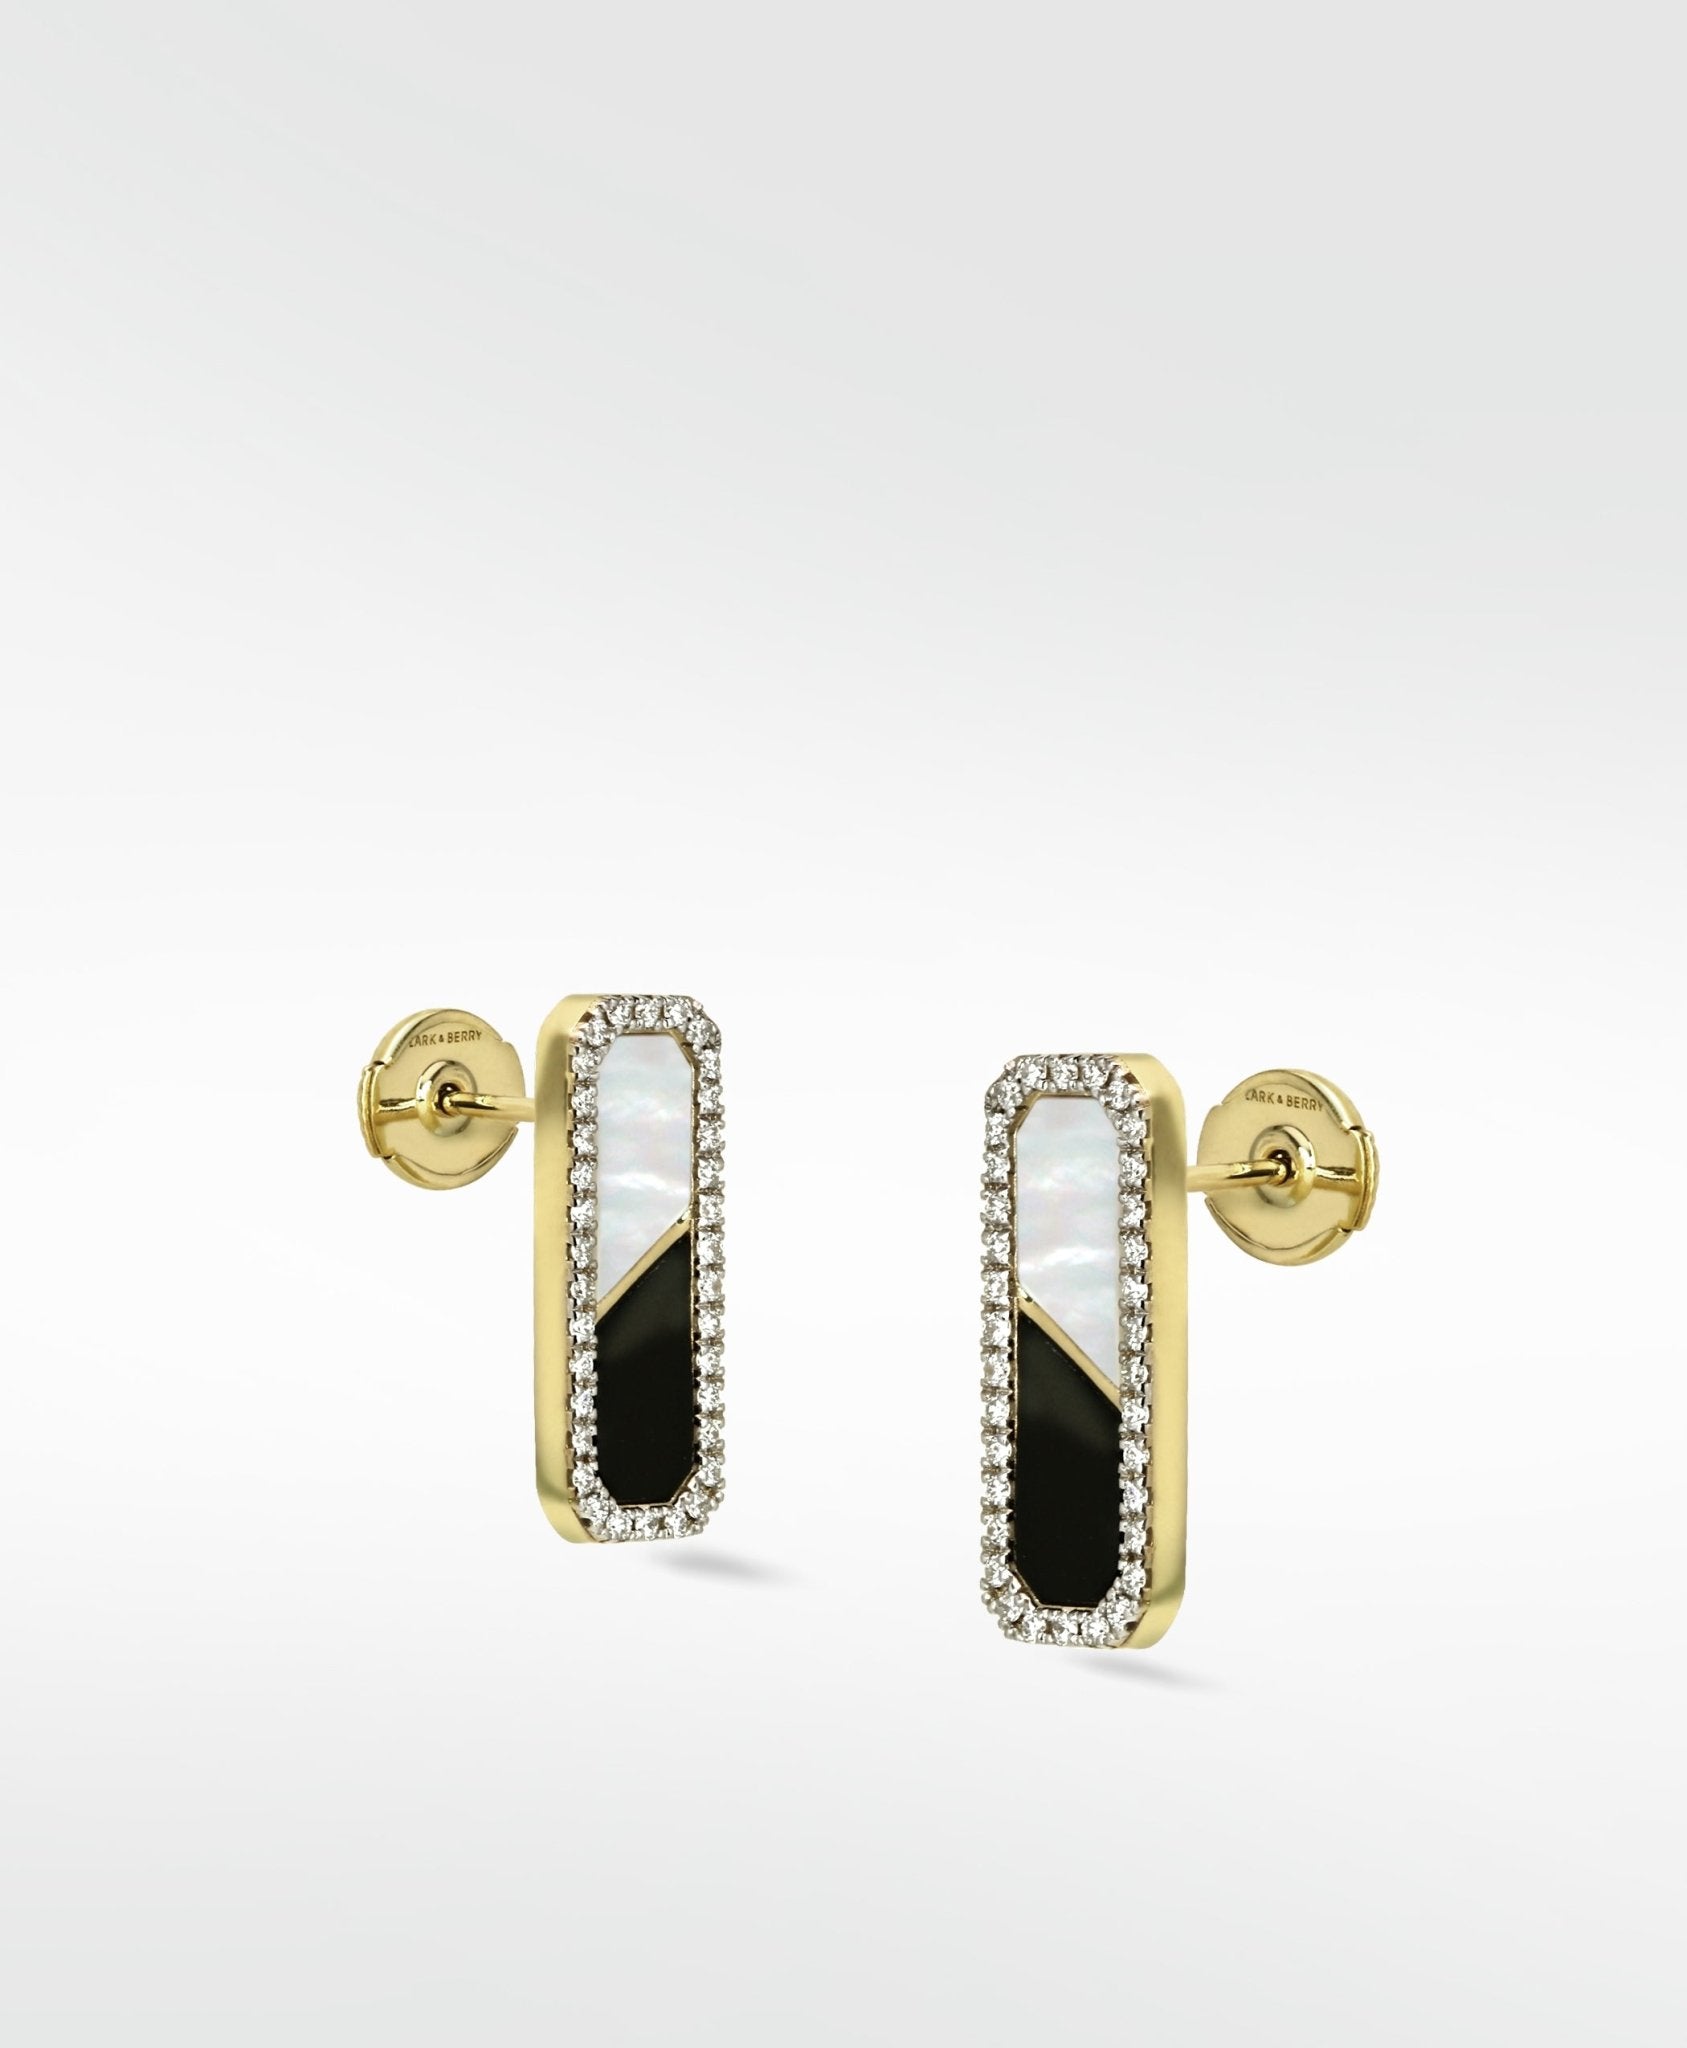 Eclipsis Diamond, Mother of Pearl and Onyx Earrings in 18k Yellow Gold - Lark and Berry